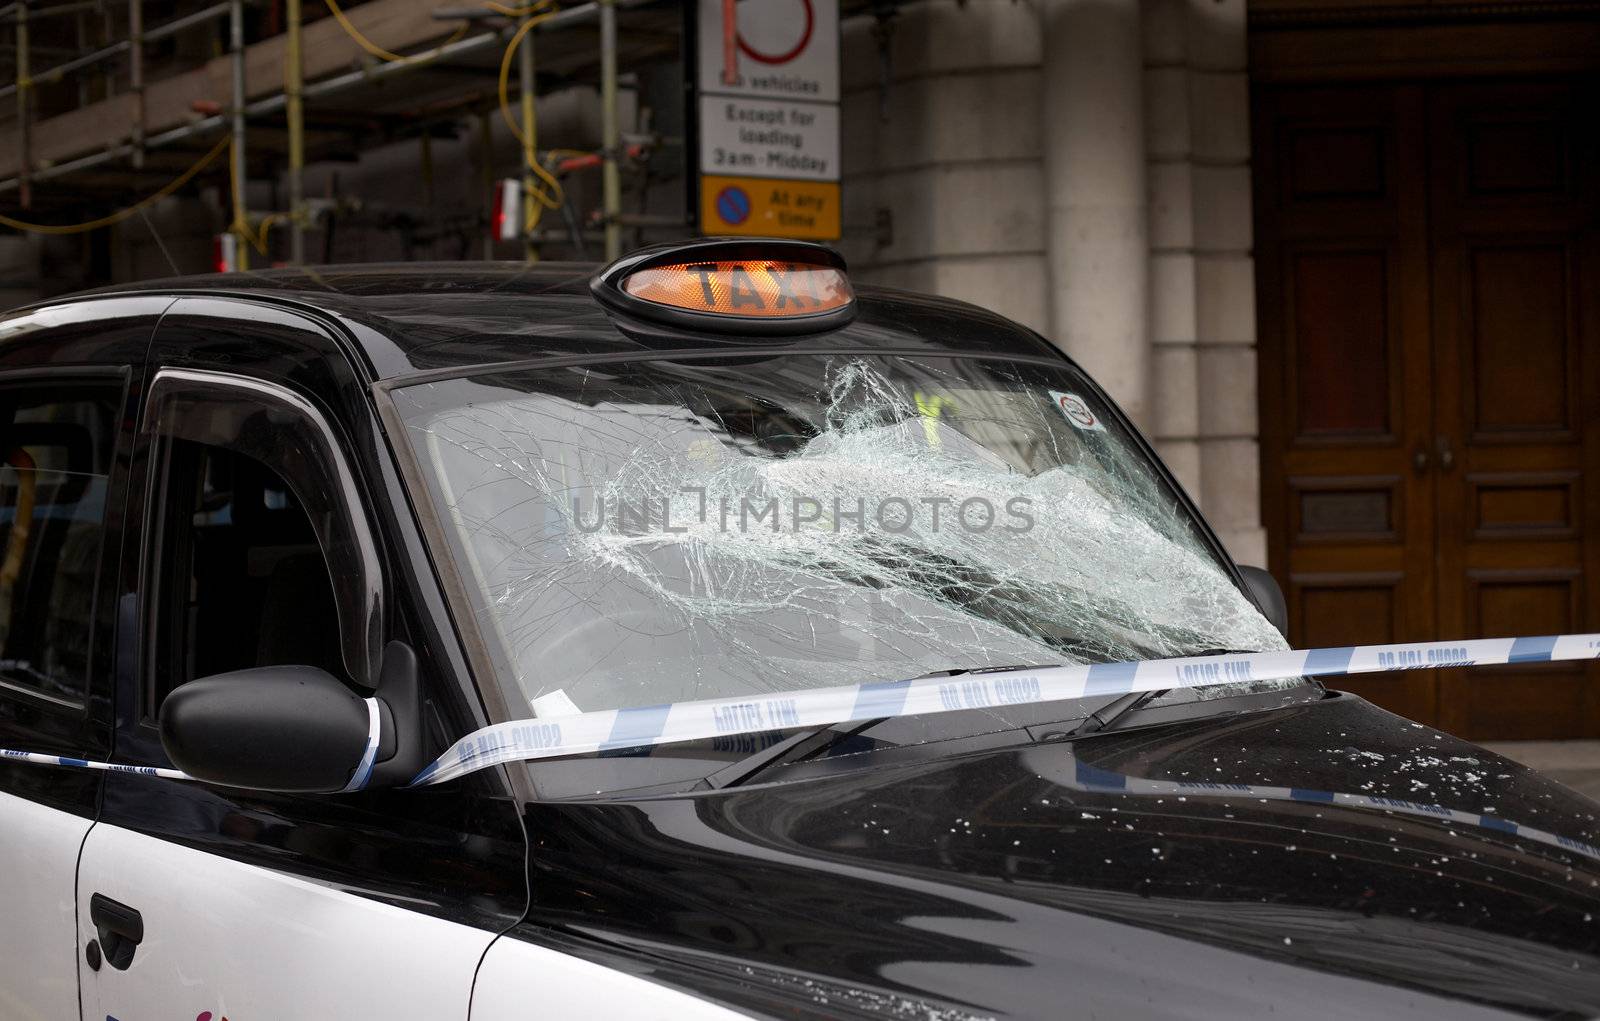 The window of a crashed taxi cab in London, UK